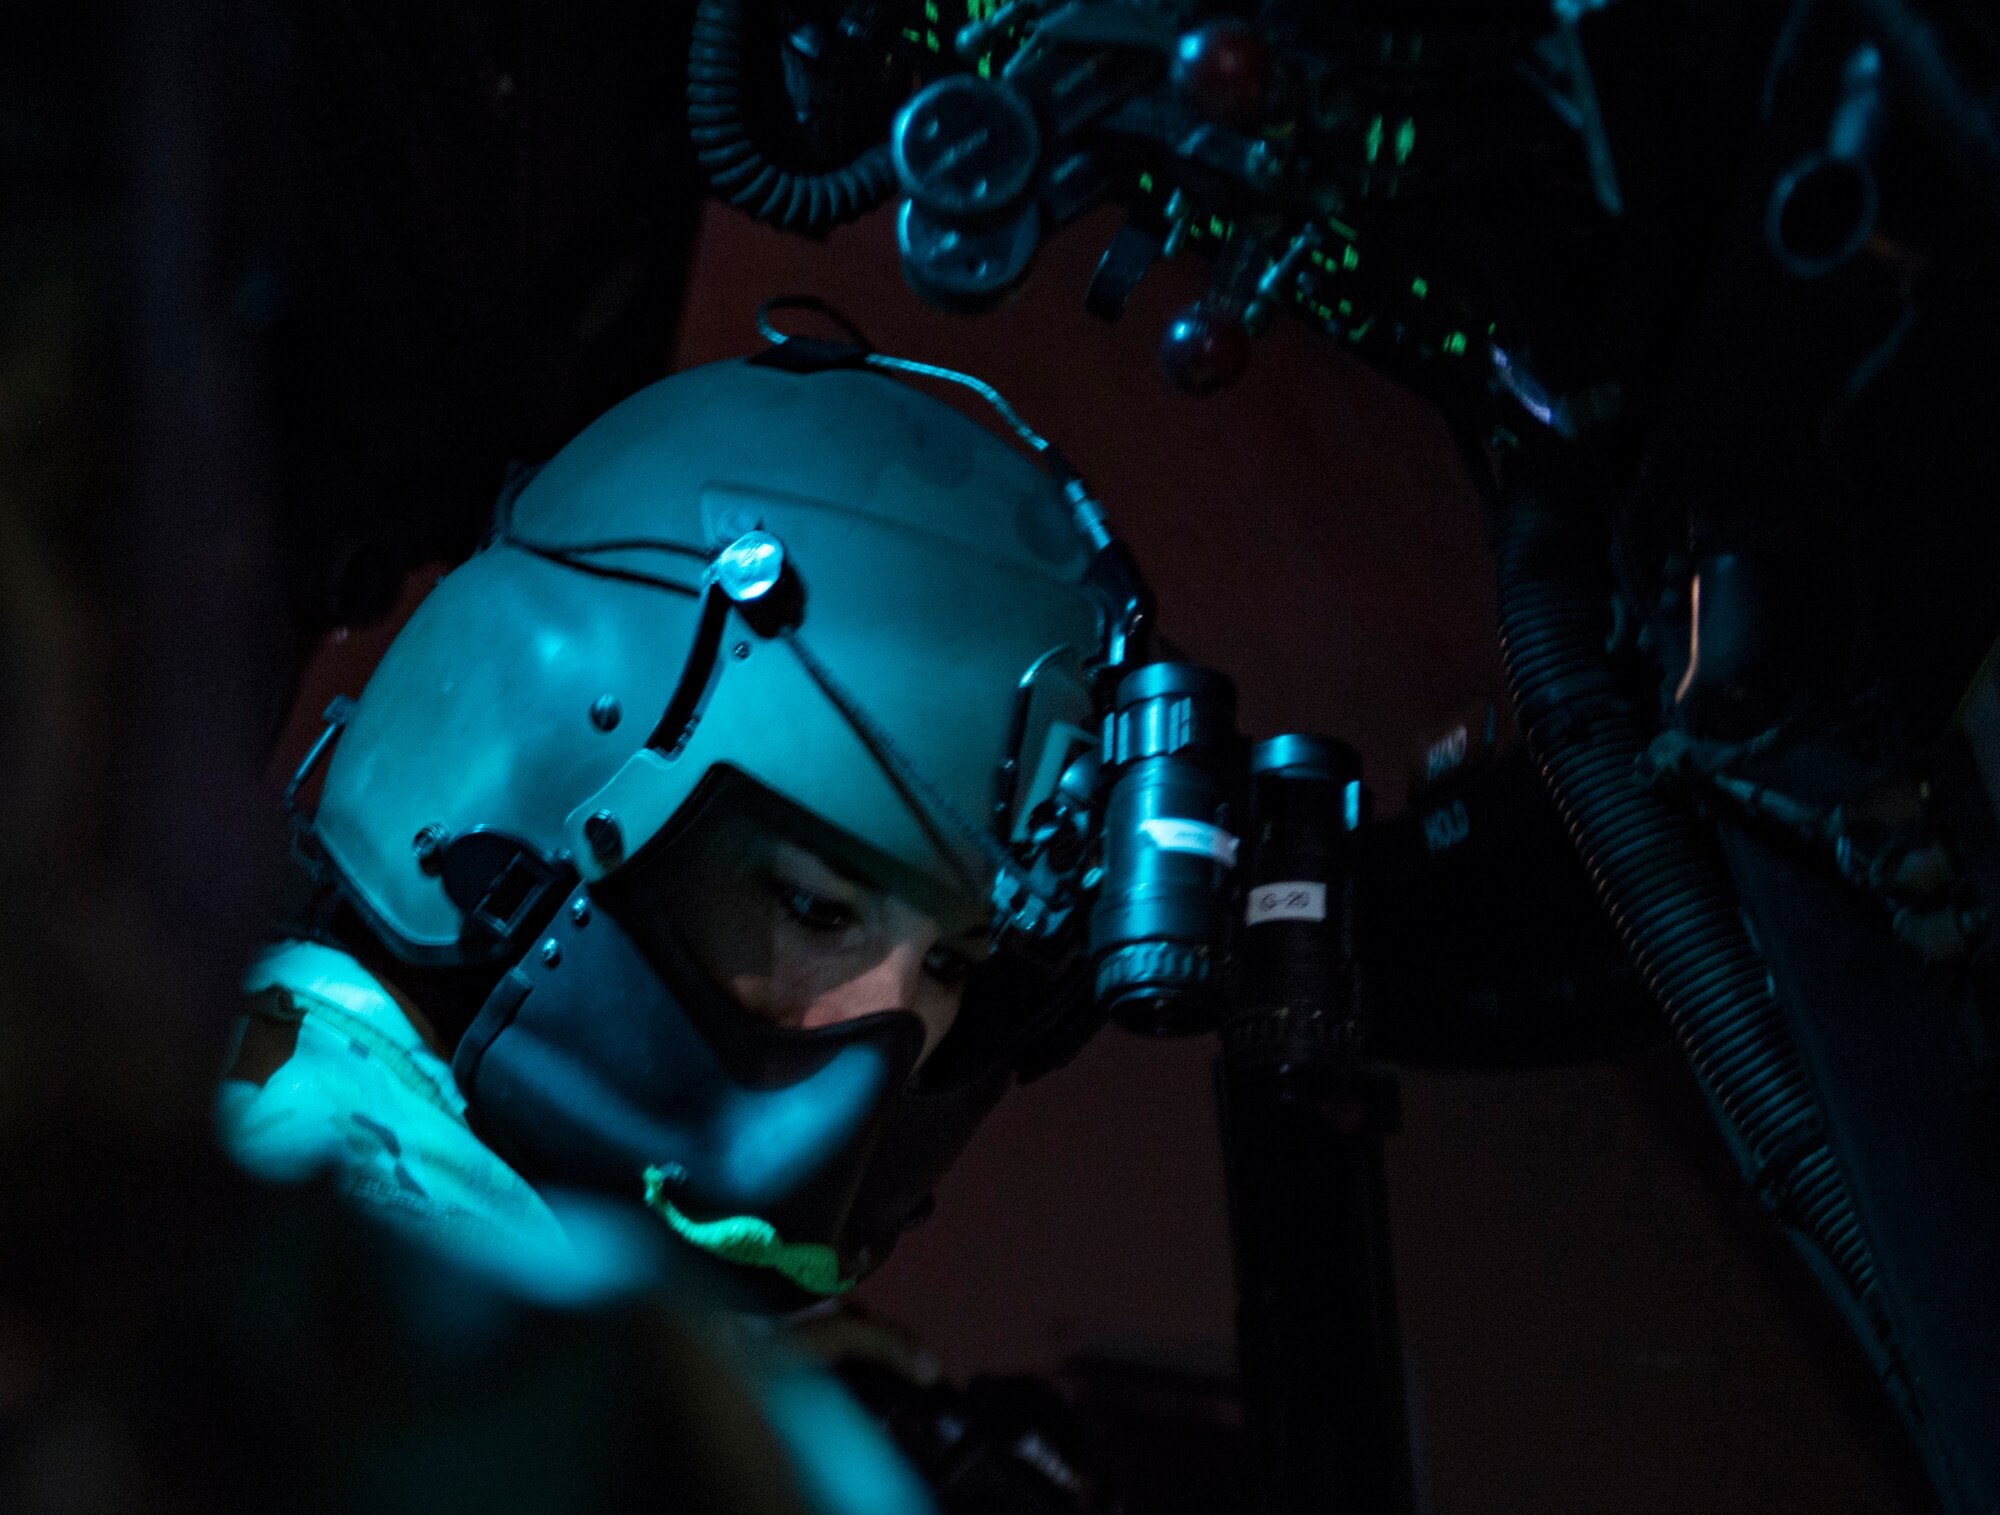 U.S. Air Force Capt. Victoria Snow, HH-60G Pave Hawk pilot assigned to the 33rd Expeditionary Rescue Squadron, performs a preflight check before a training mission with a Guardian Angel team assigned to the 308th ERQS, Kandahar Airfield, Afghanistan, in support of Operation Freedom’s Sentinel and the NATO Resolute Support mission, March 13, 2018.